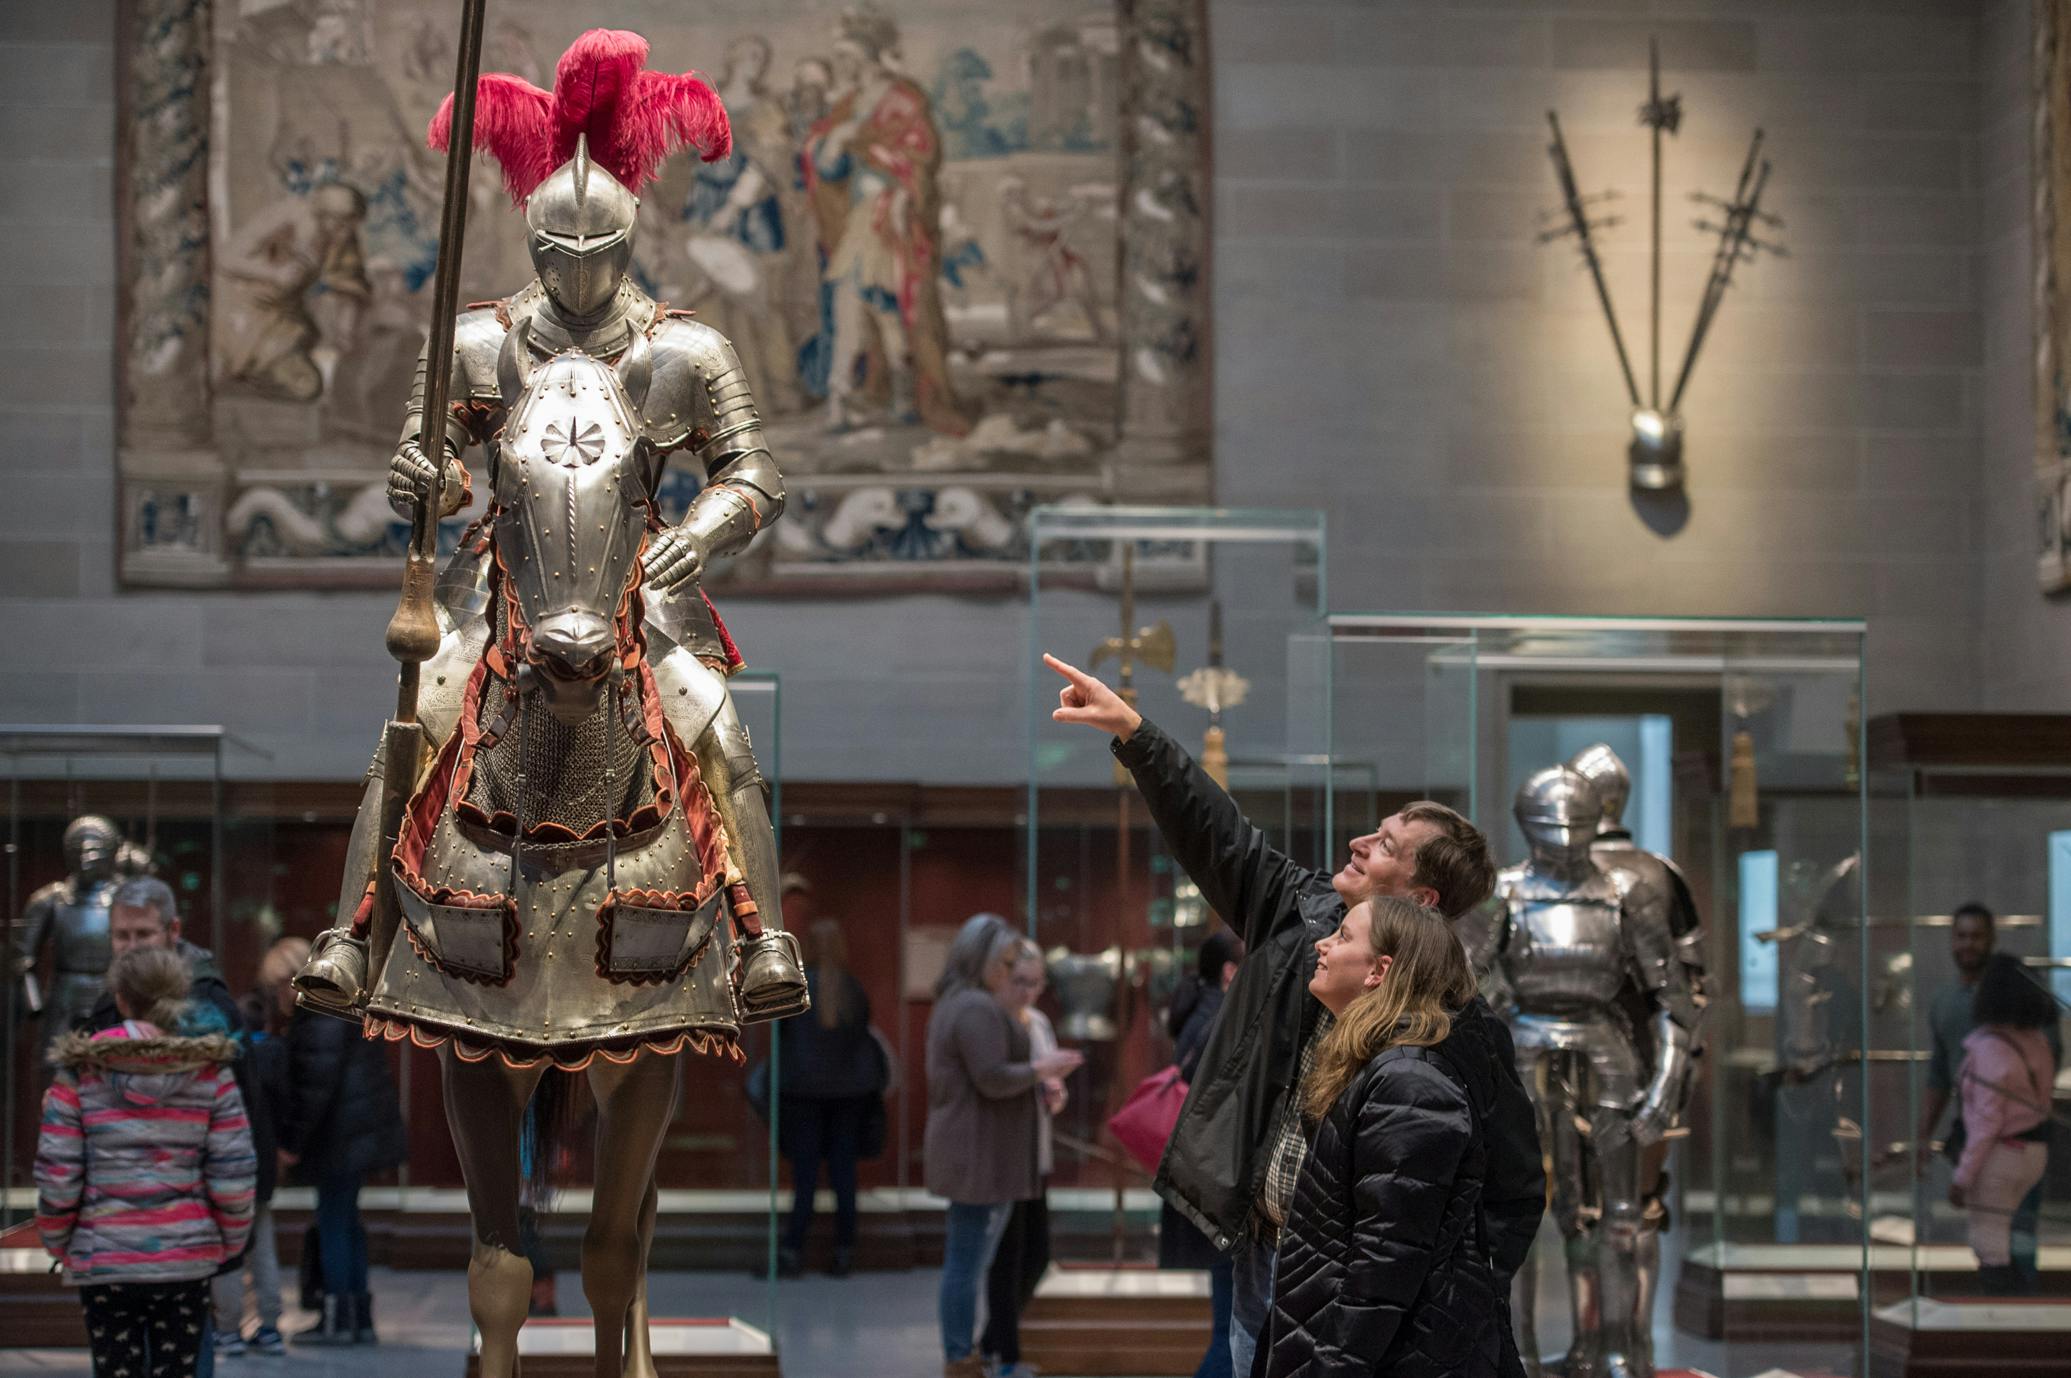 Visitors in the museum armor court